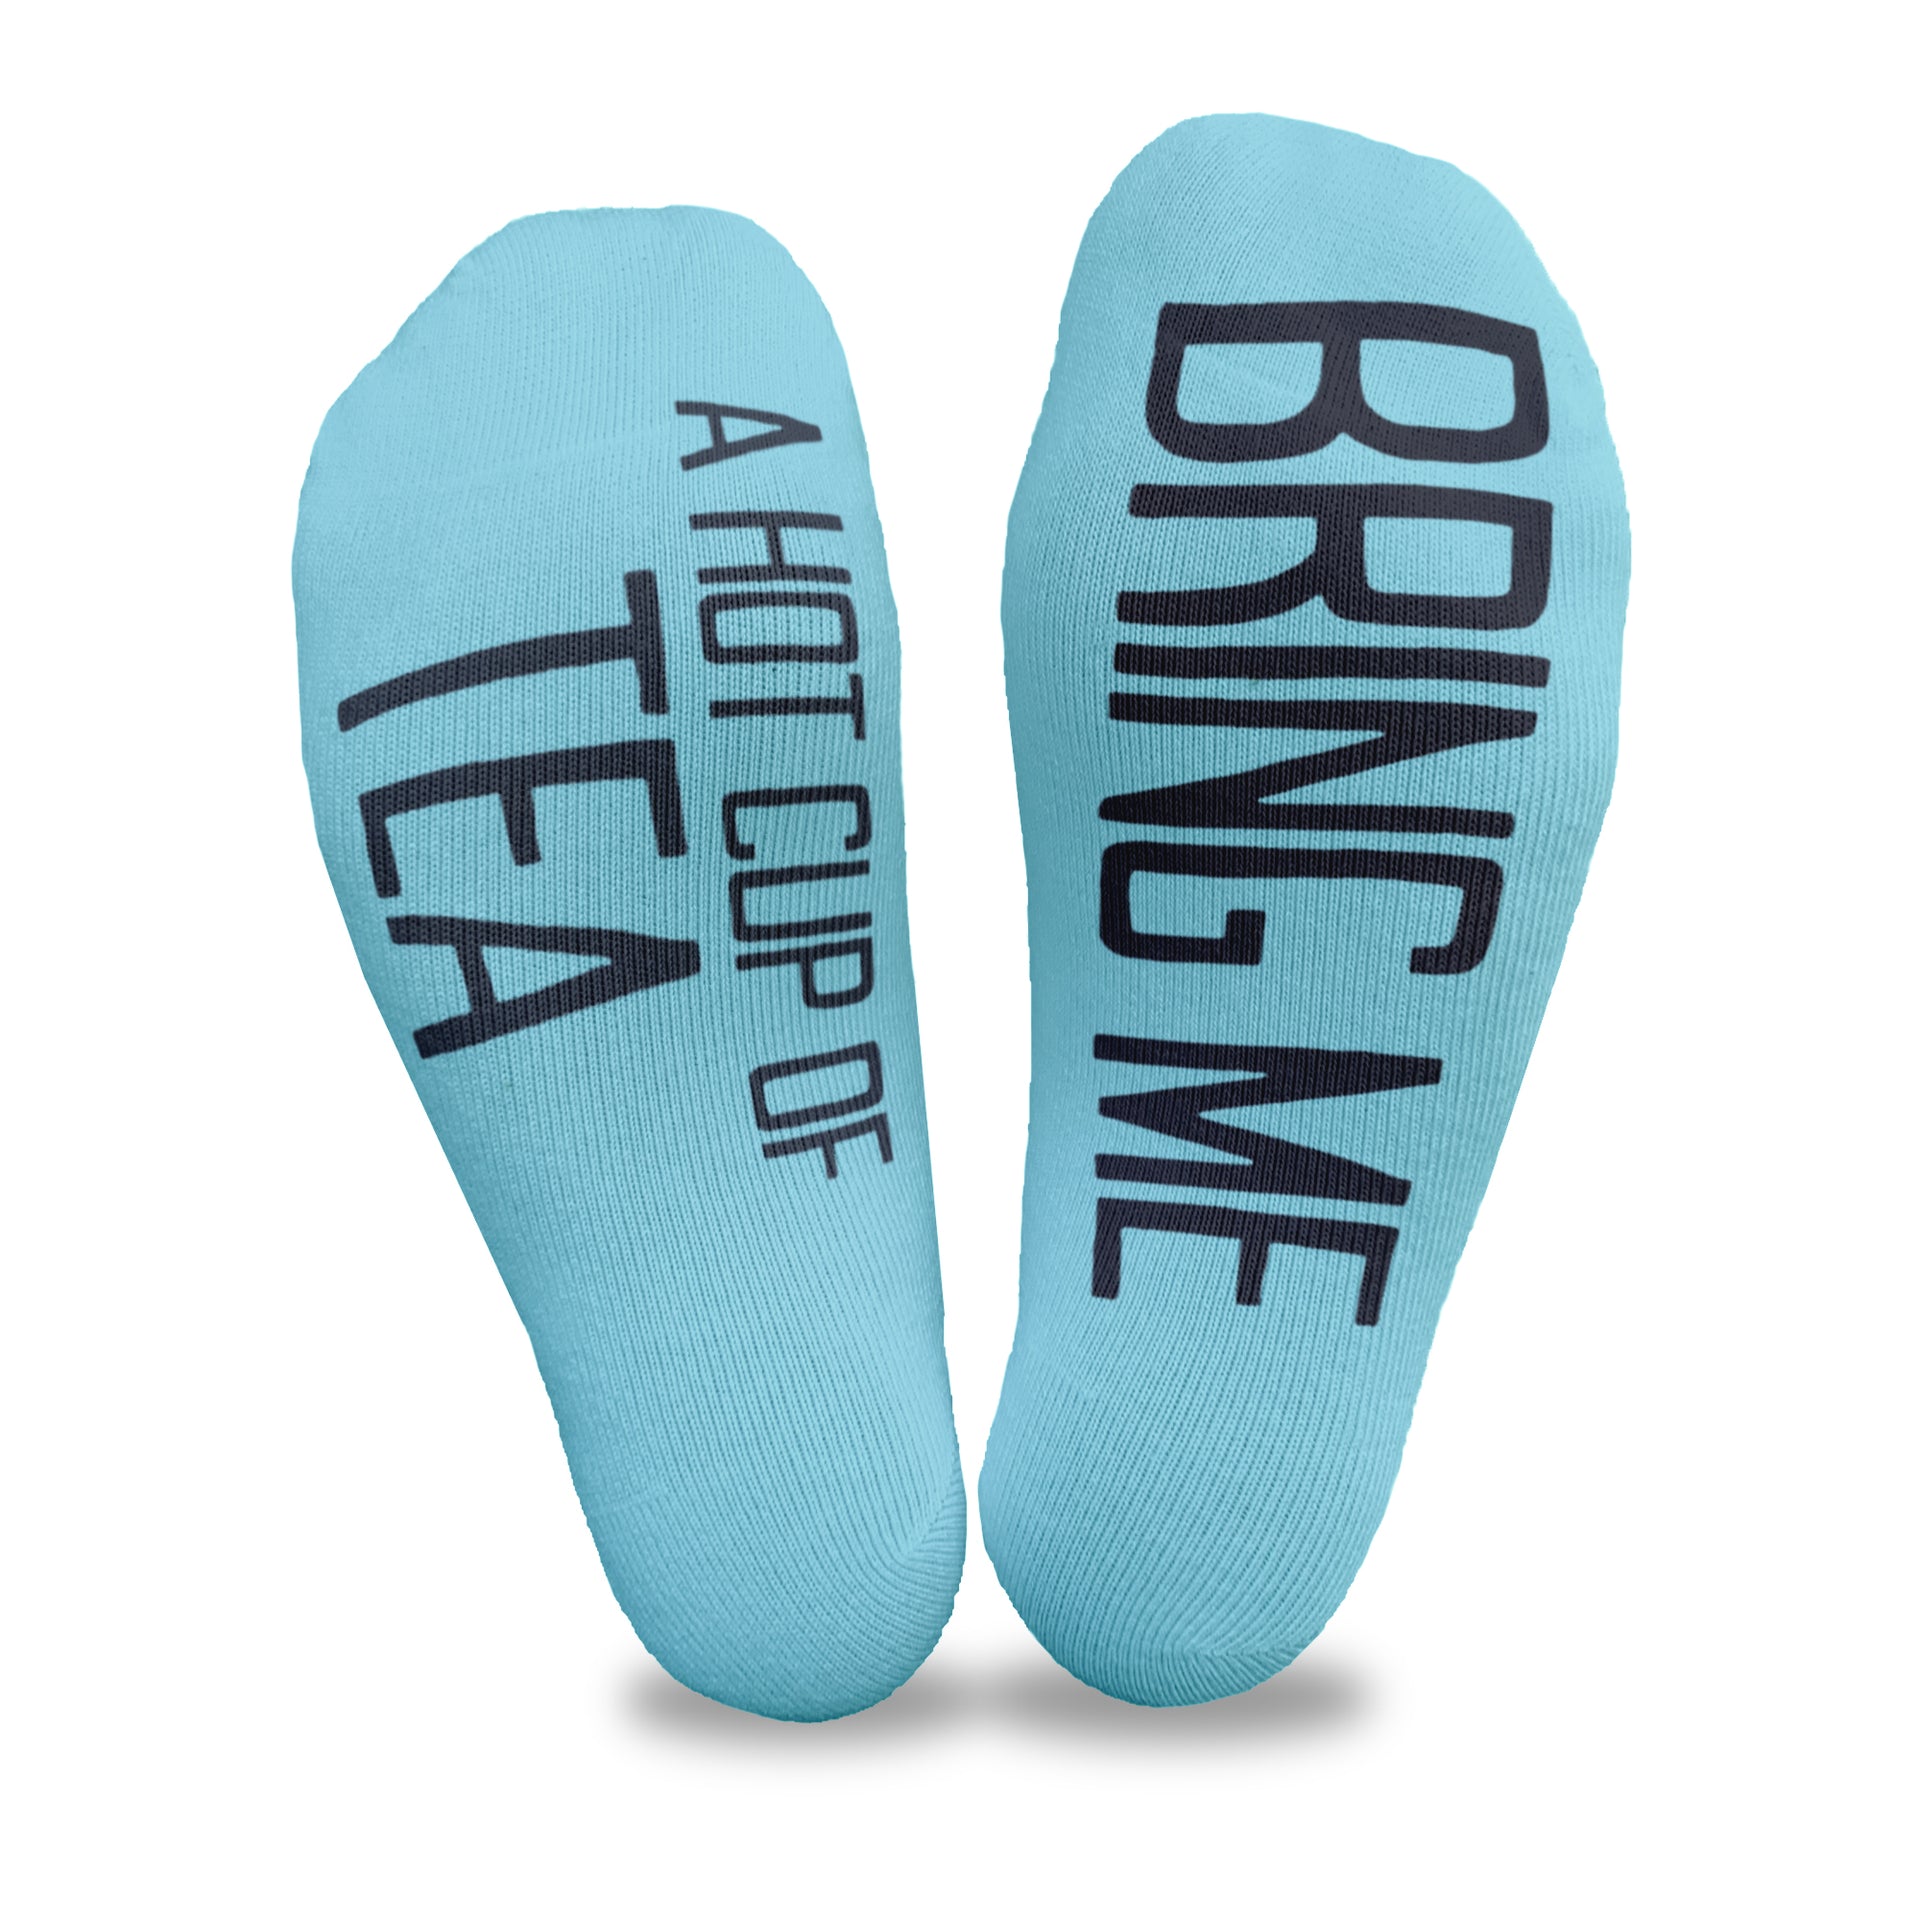 Bring me a hot cup of tea custom printed on the bottom soles of turquoise no show socks a great gift for the tea lover.